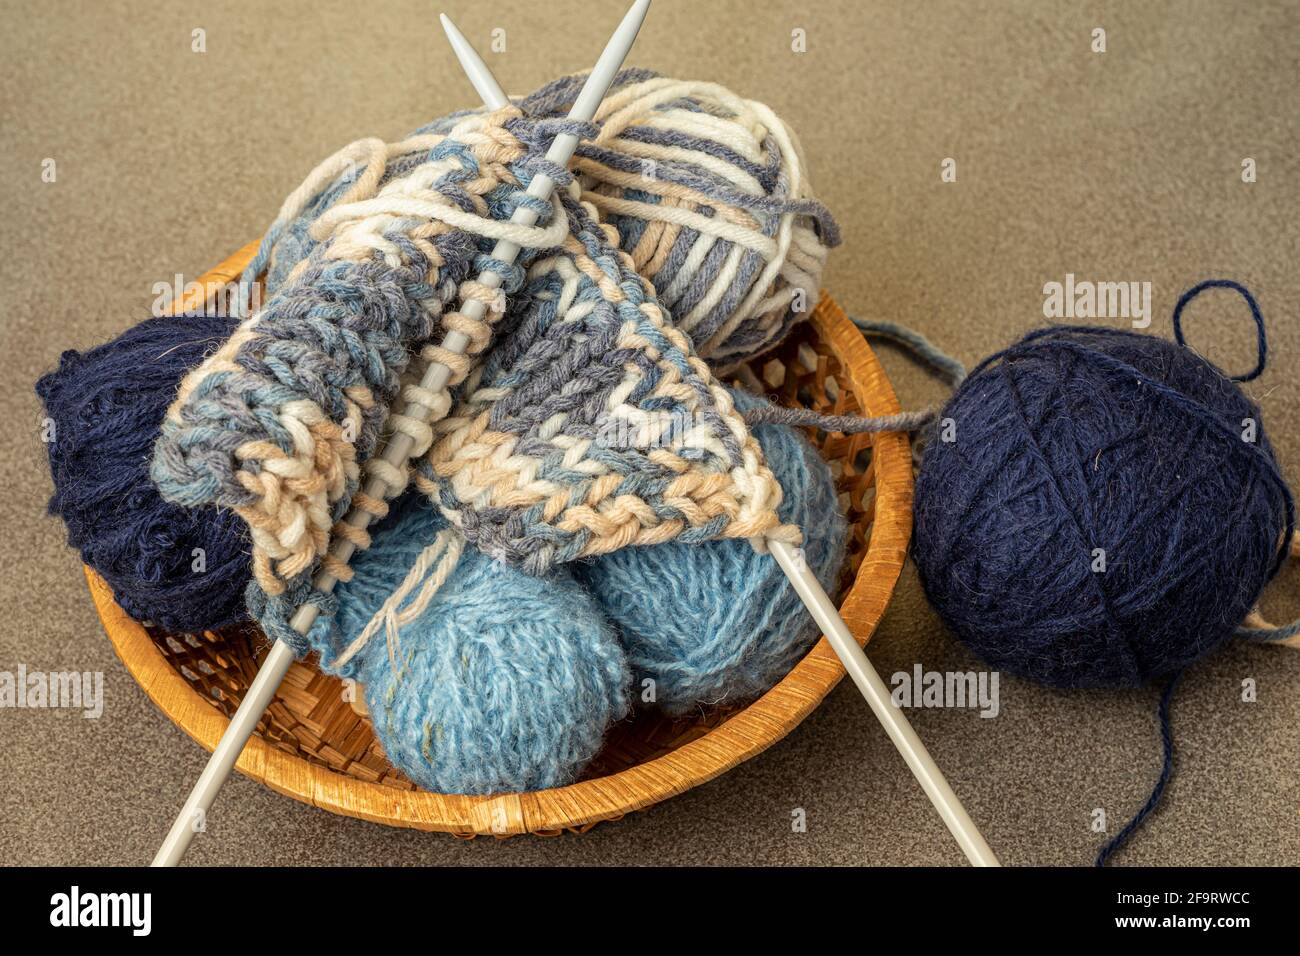 Knitting supplies close-up. Balls of knitting wool in a round